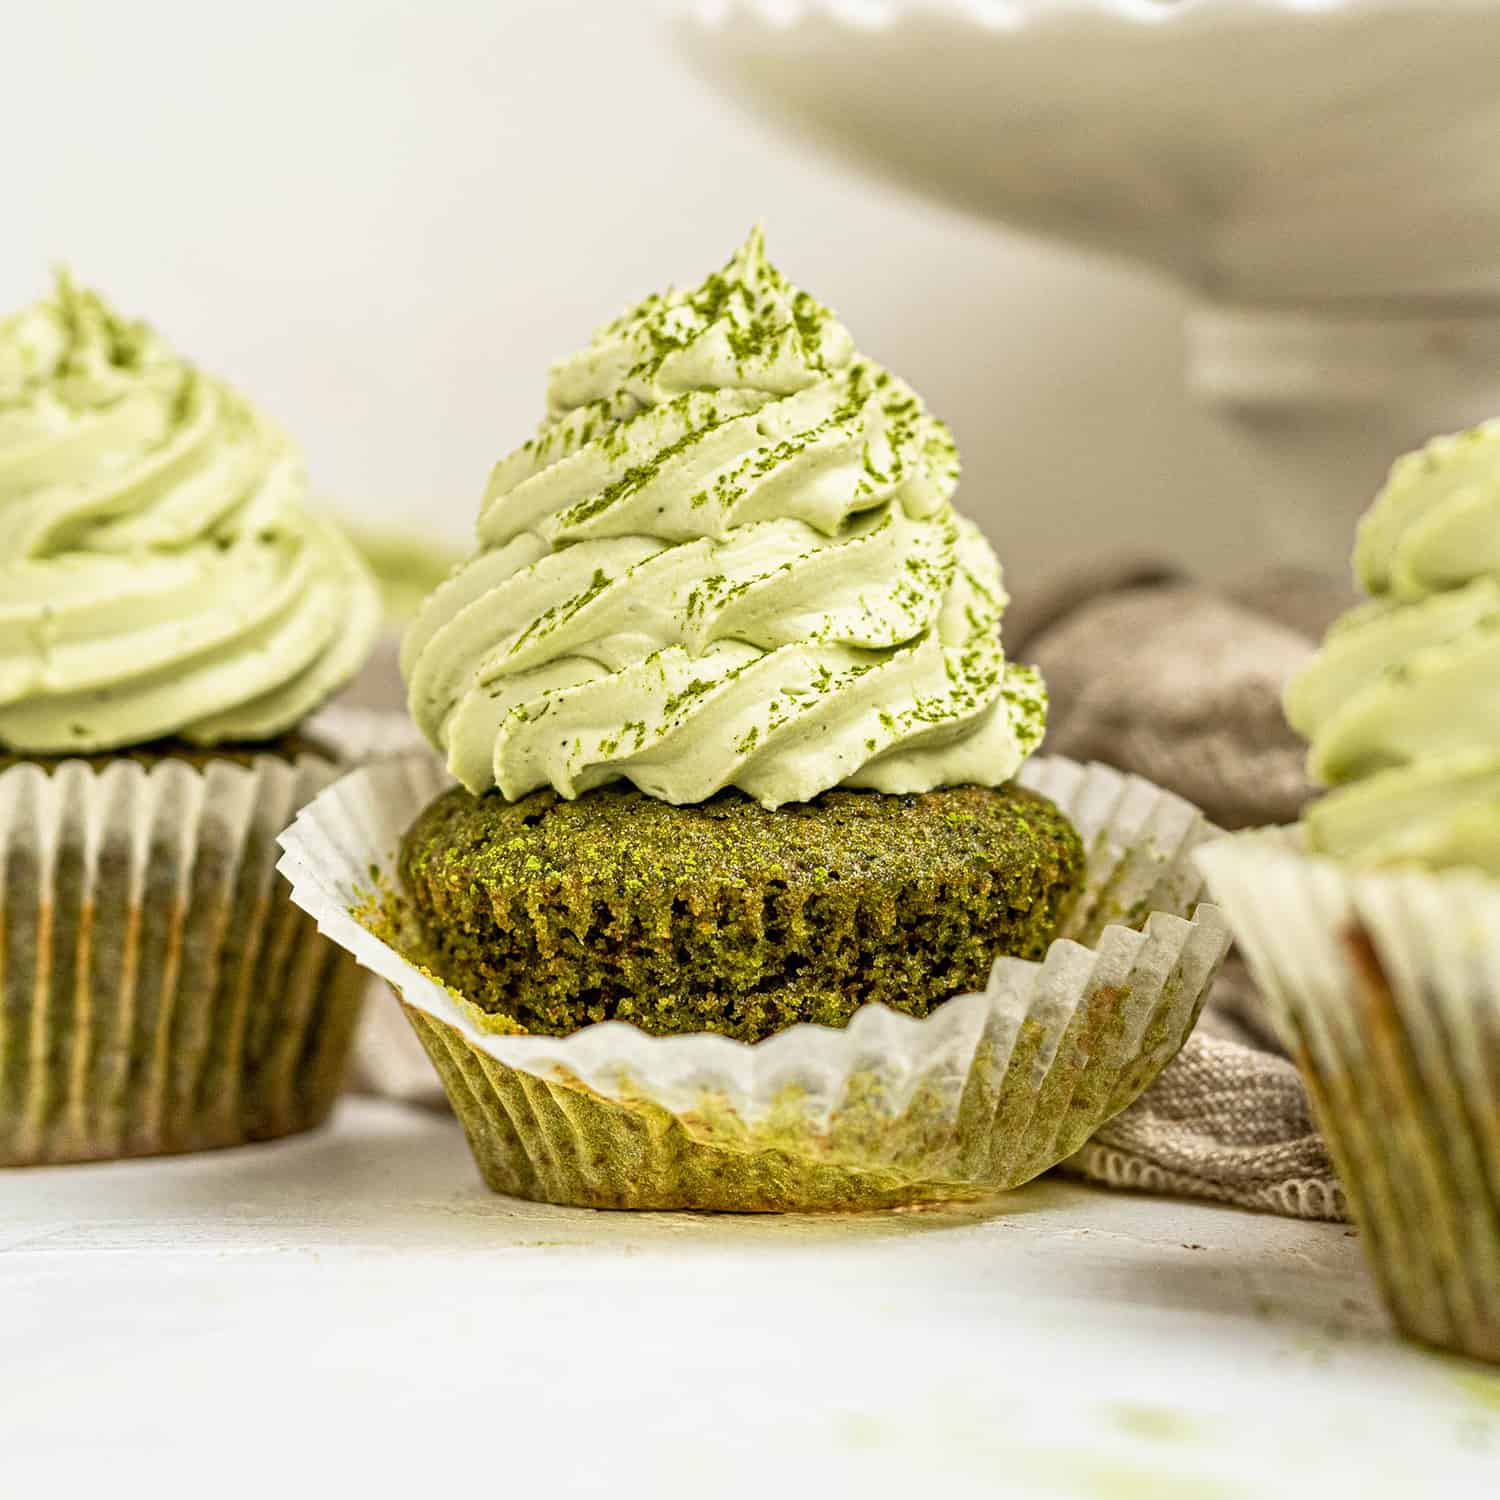 matcha cupcakes with whipped green tea white chocolate ganache frosting